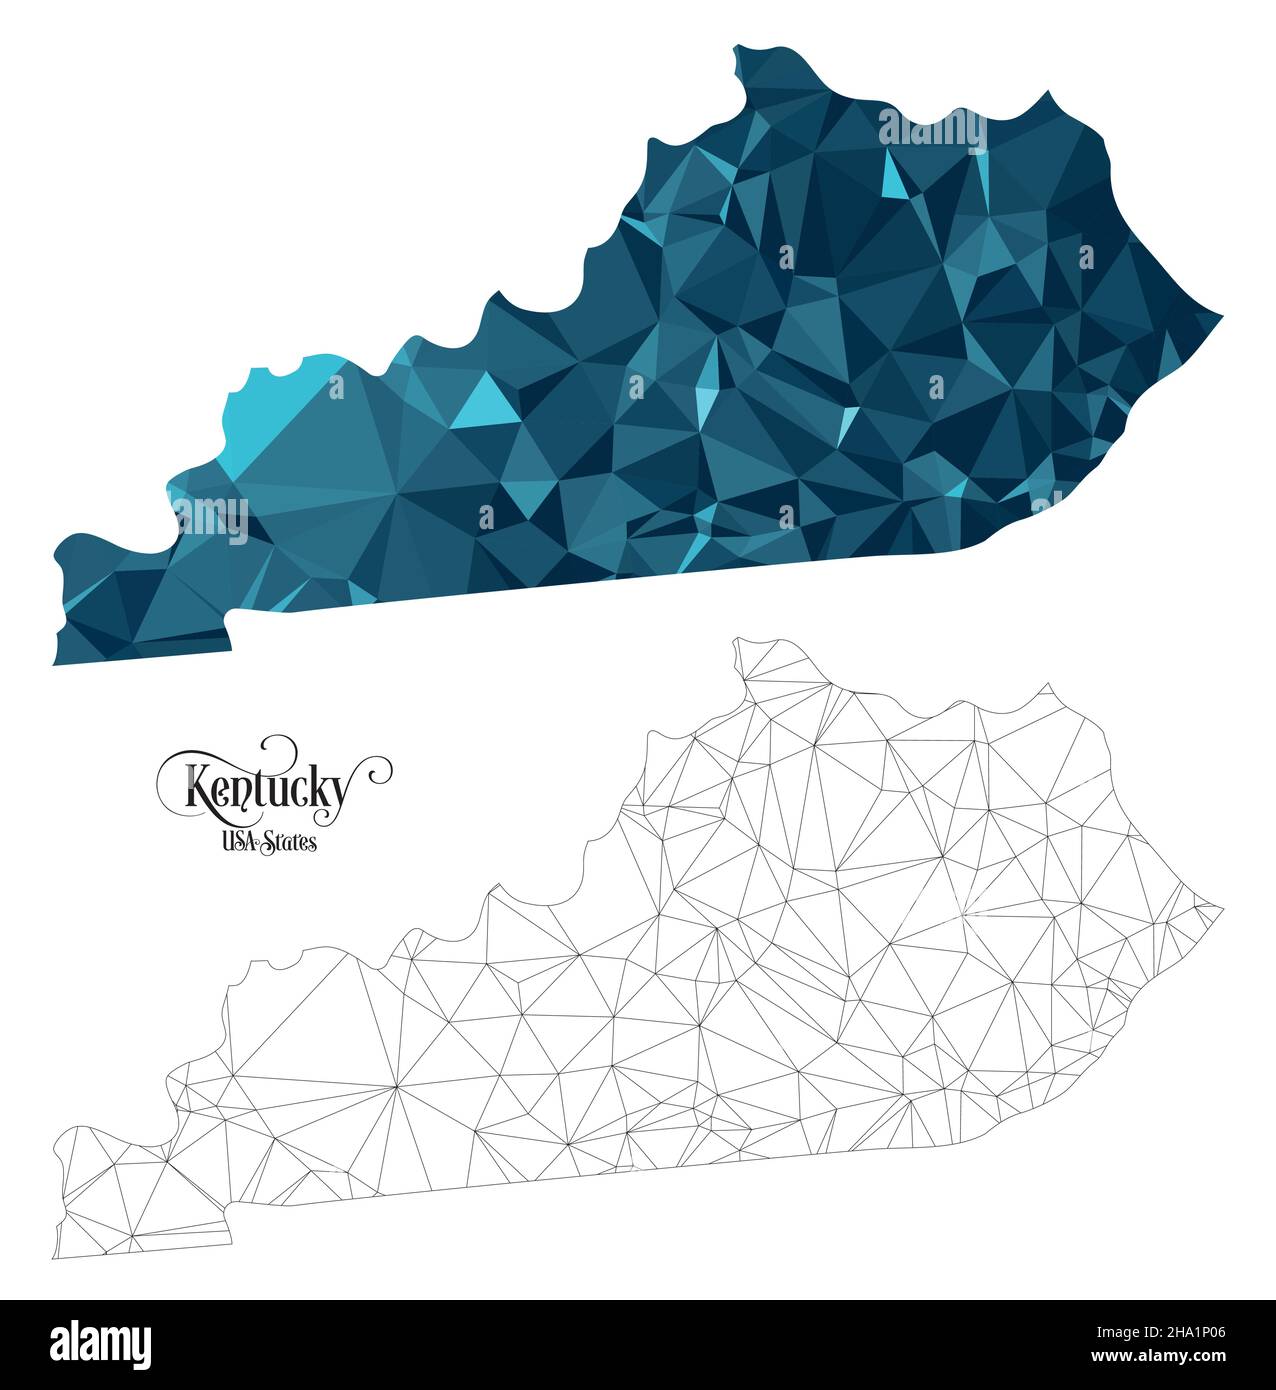 Low Poly Map of Kentucky State (USA). Polygonal Shape Vector Illustration on White Background. States of America Territory. Stock Vector